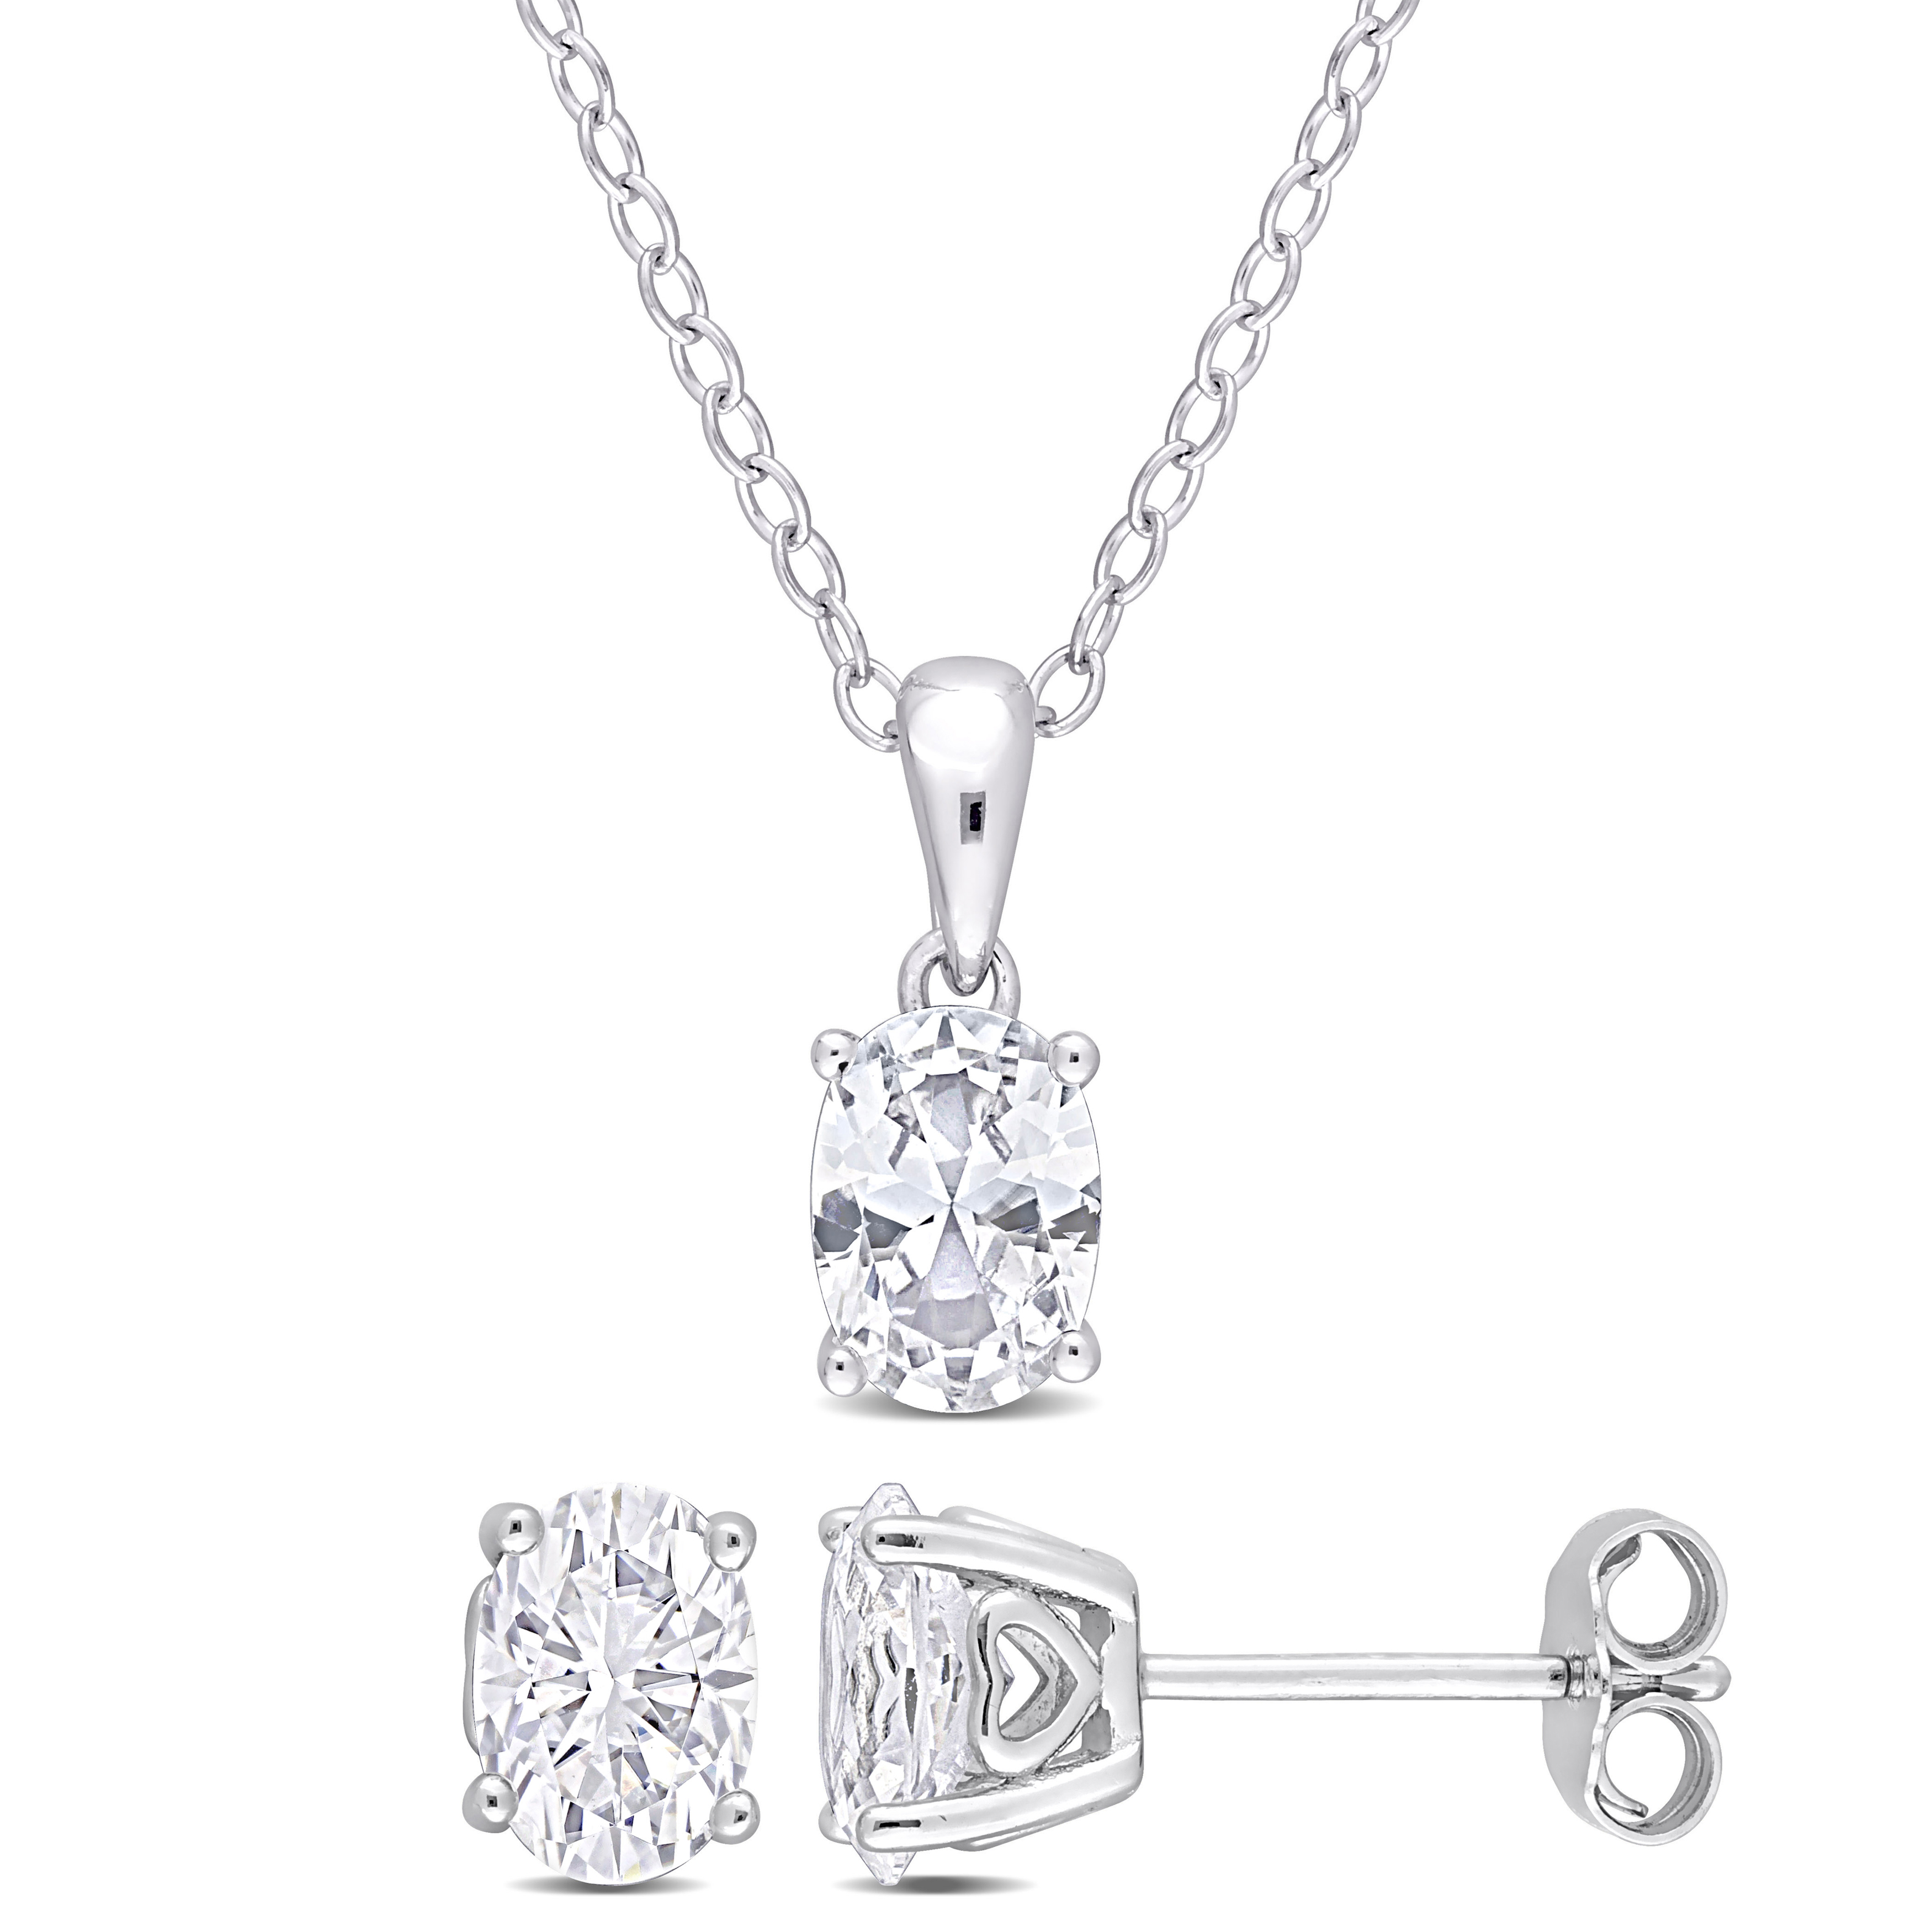 3 4/5 CT TGW Oval Created White Sapphire 2-Piece Set of Pendant with Chain and Earrings in Sterling Silver